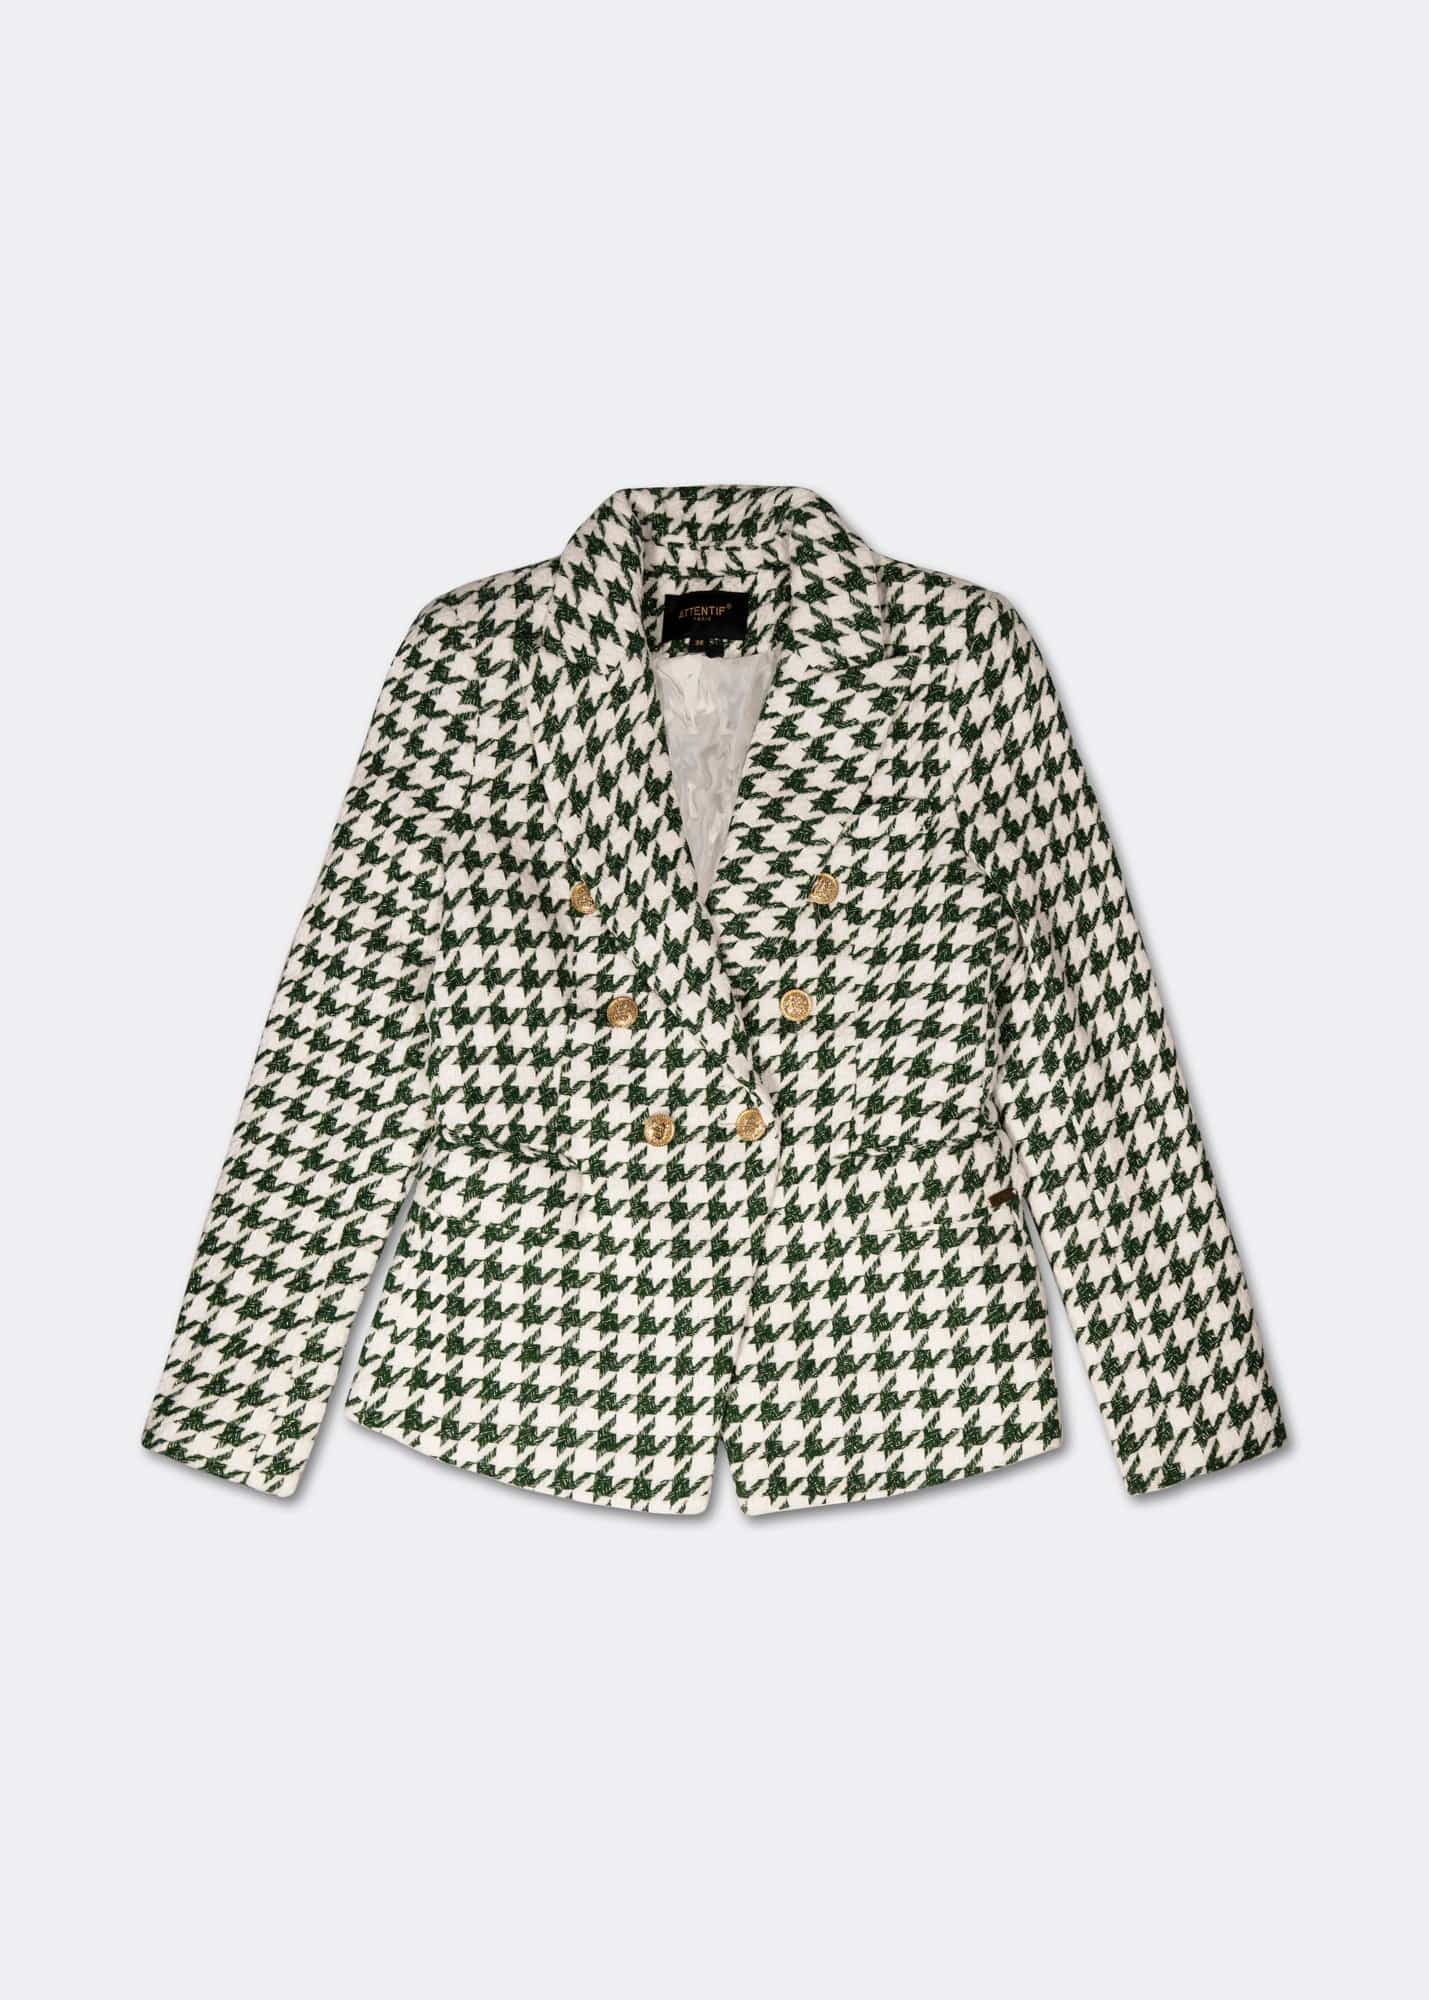 Houndstooth Parisian Blazer in White and Green - JACKETS Tribute Store